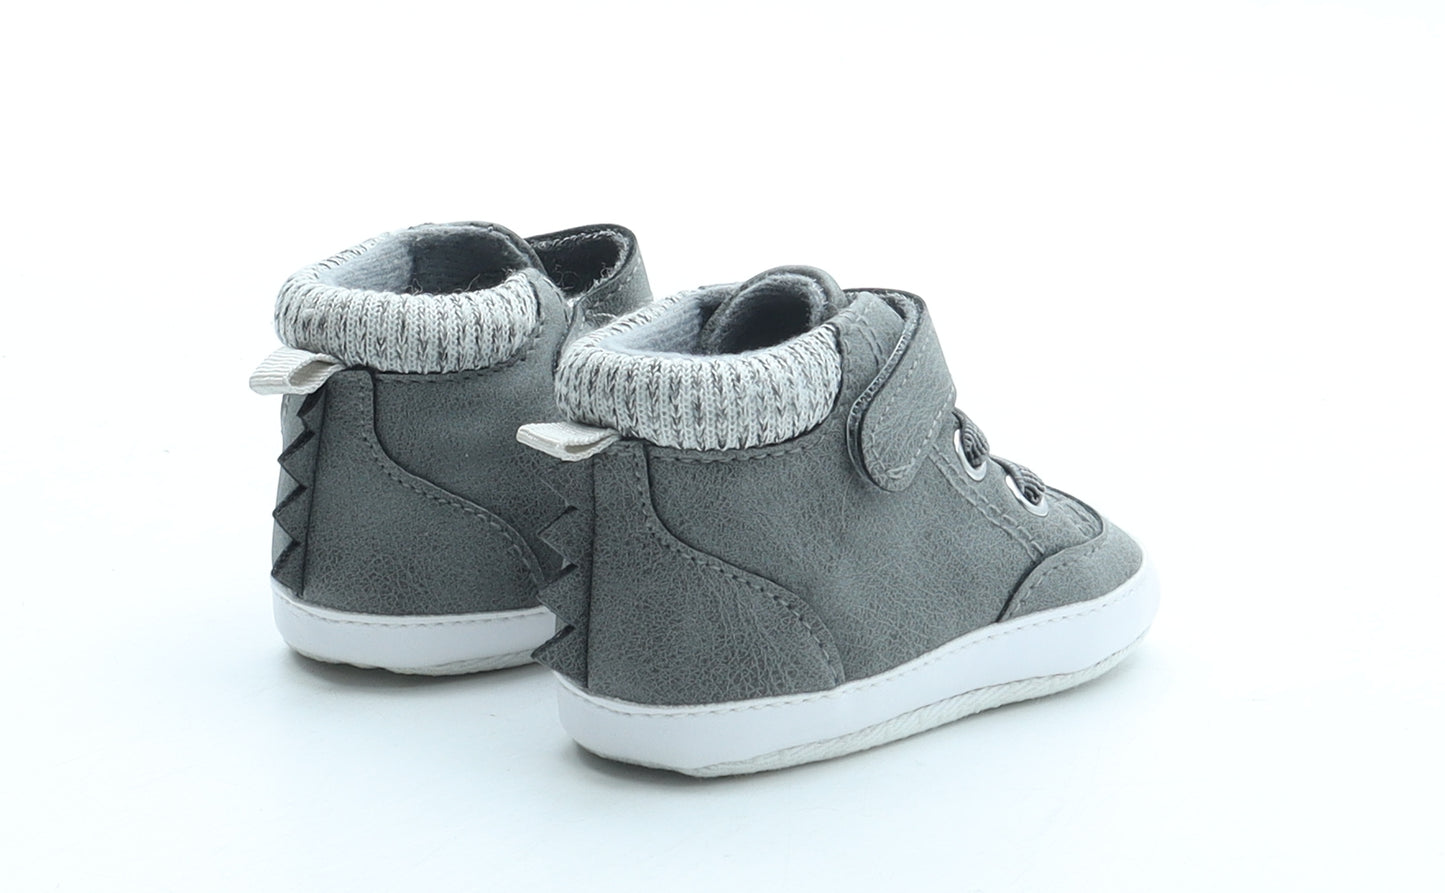 F&F Boys Grey Polyester Sneaker Trainer UK 0-6 Months